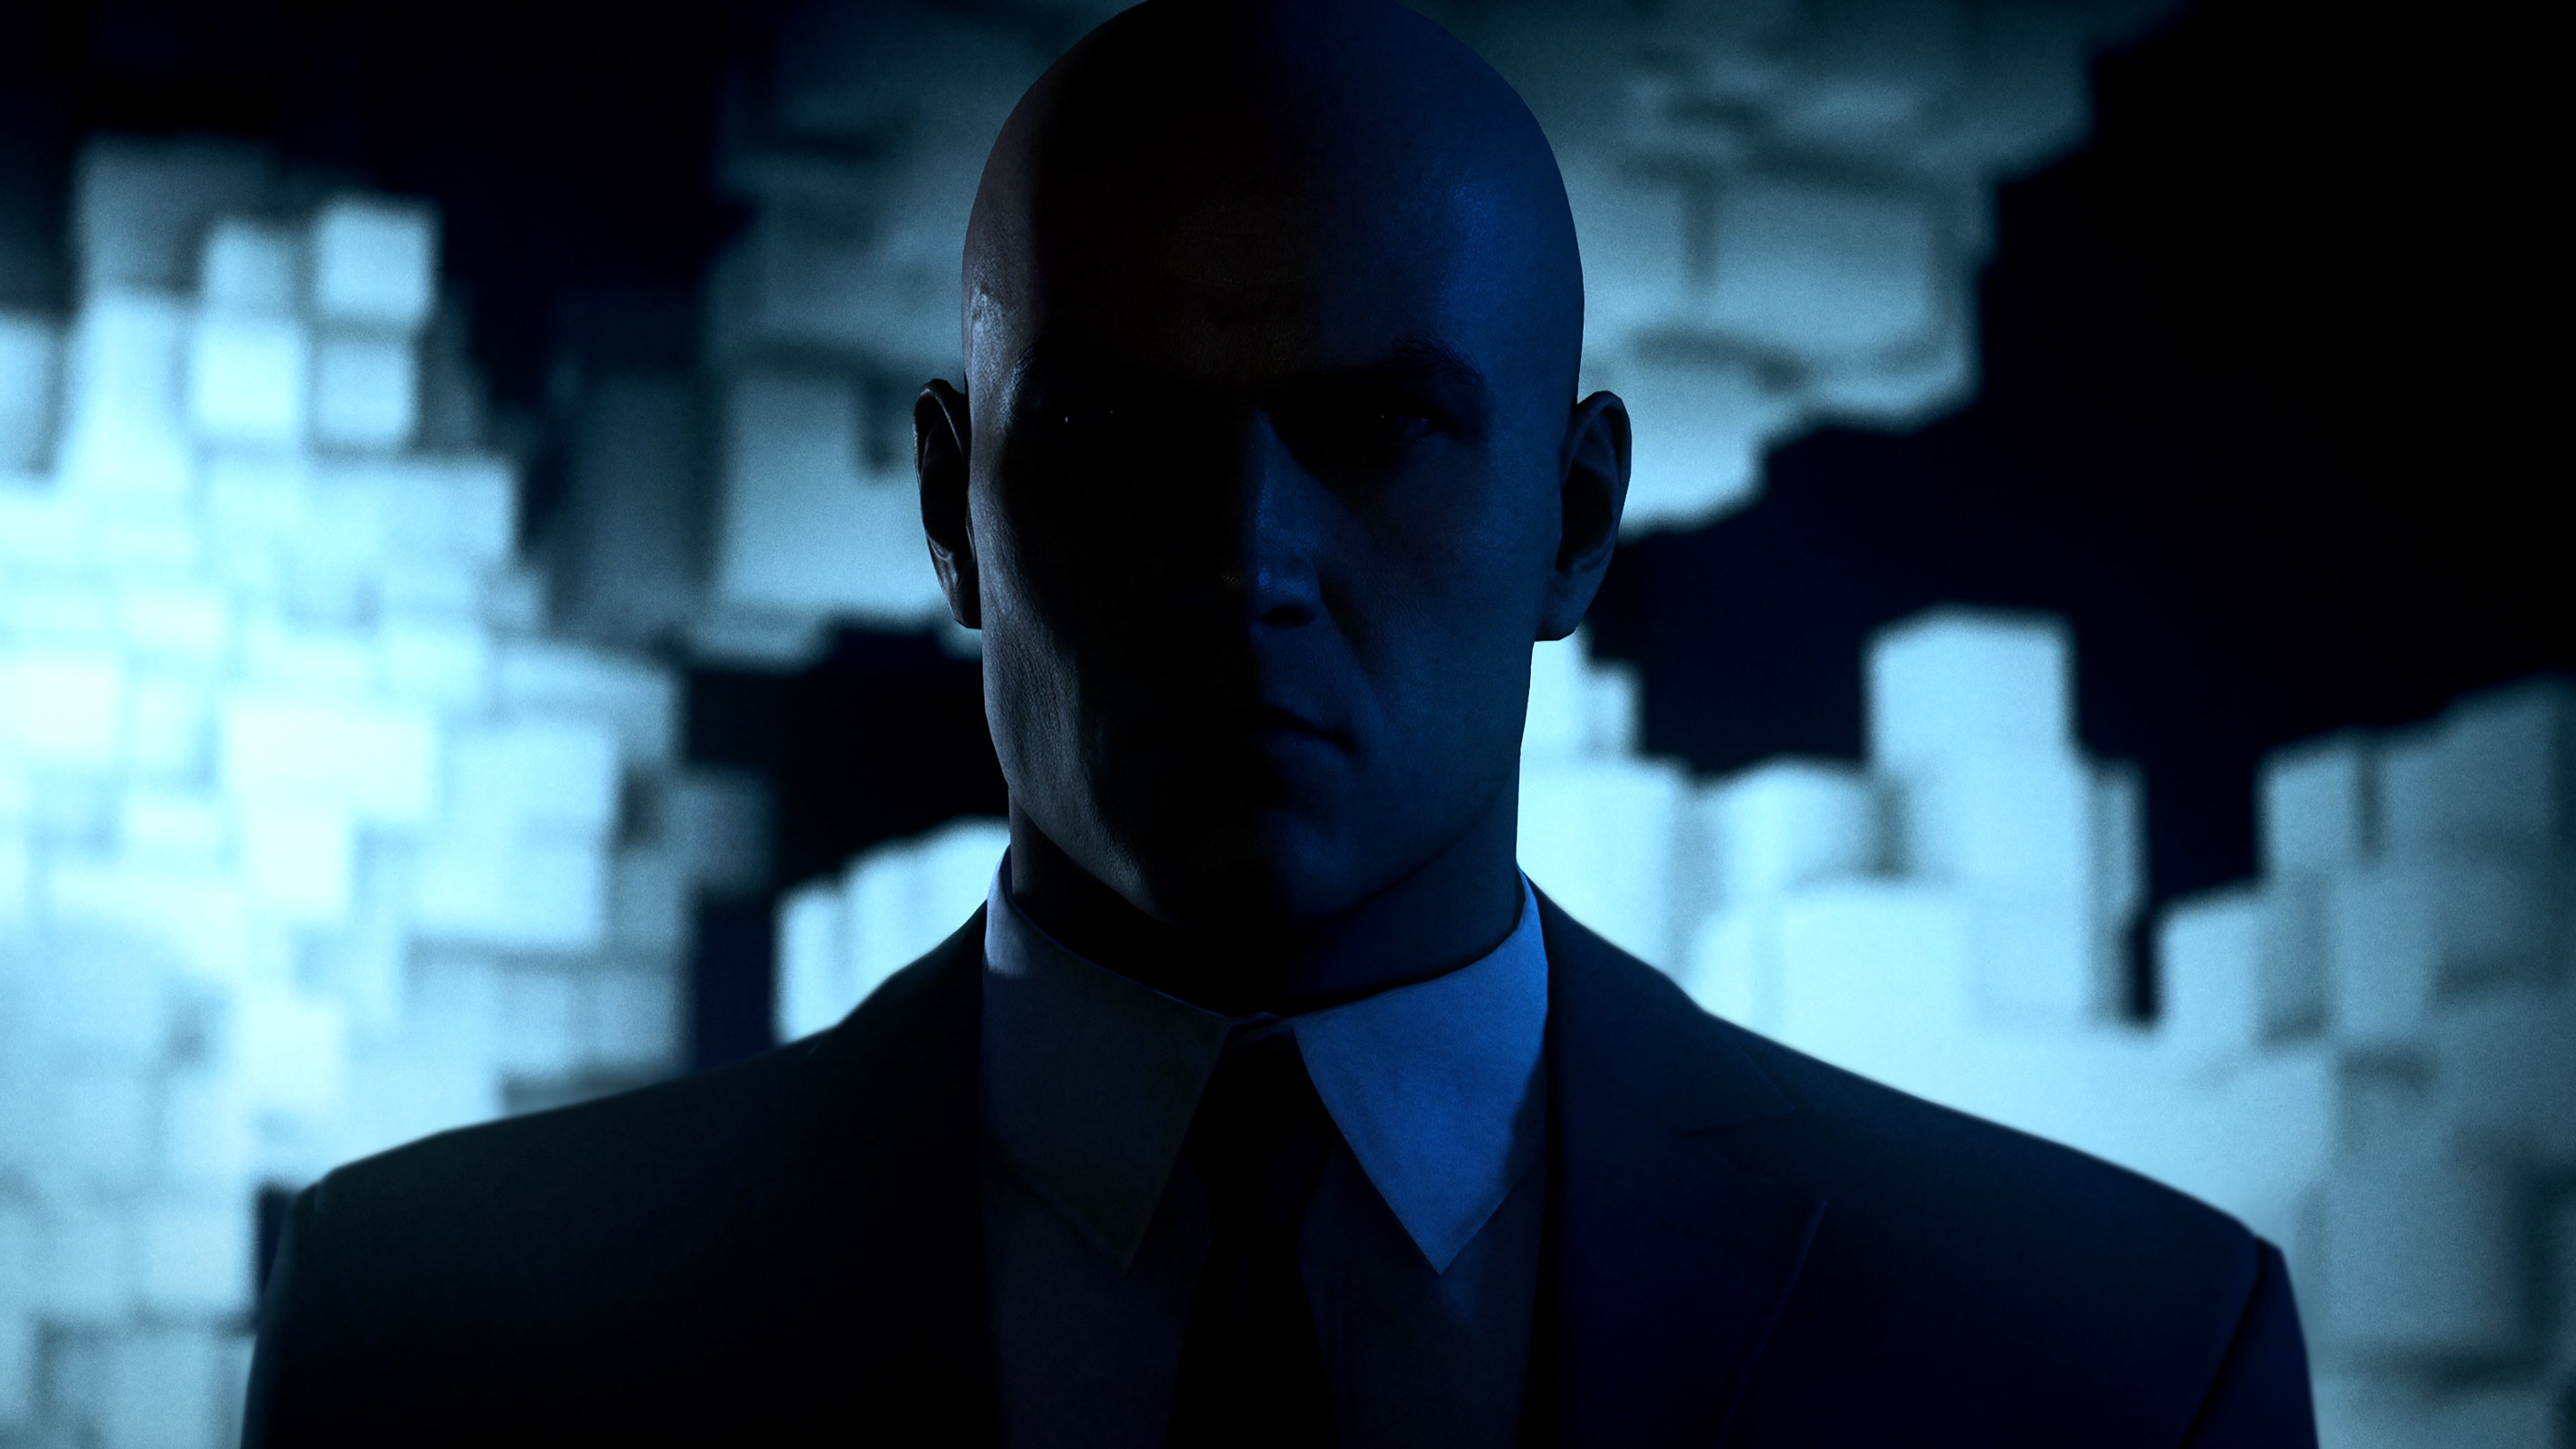 Image for You have to buy Hitman 3 Access Pass to play Hitman 2 levels on Epic Games Store